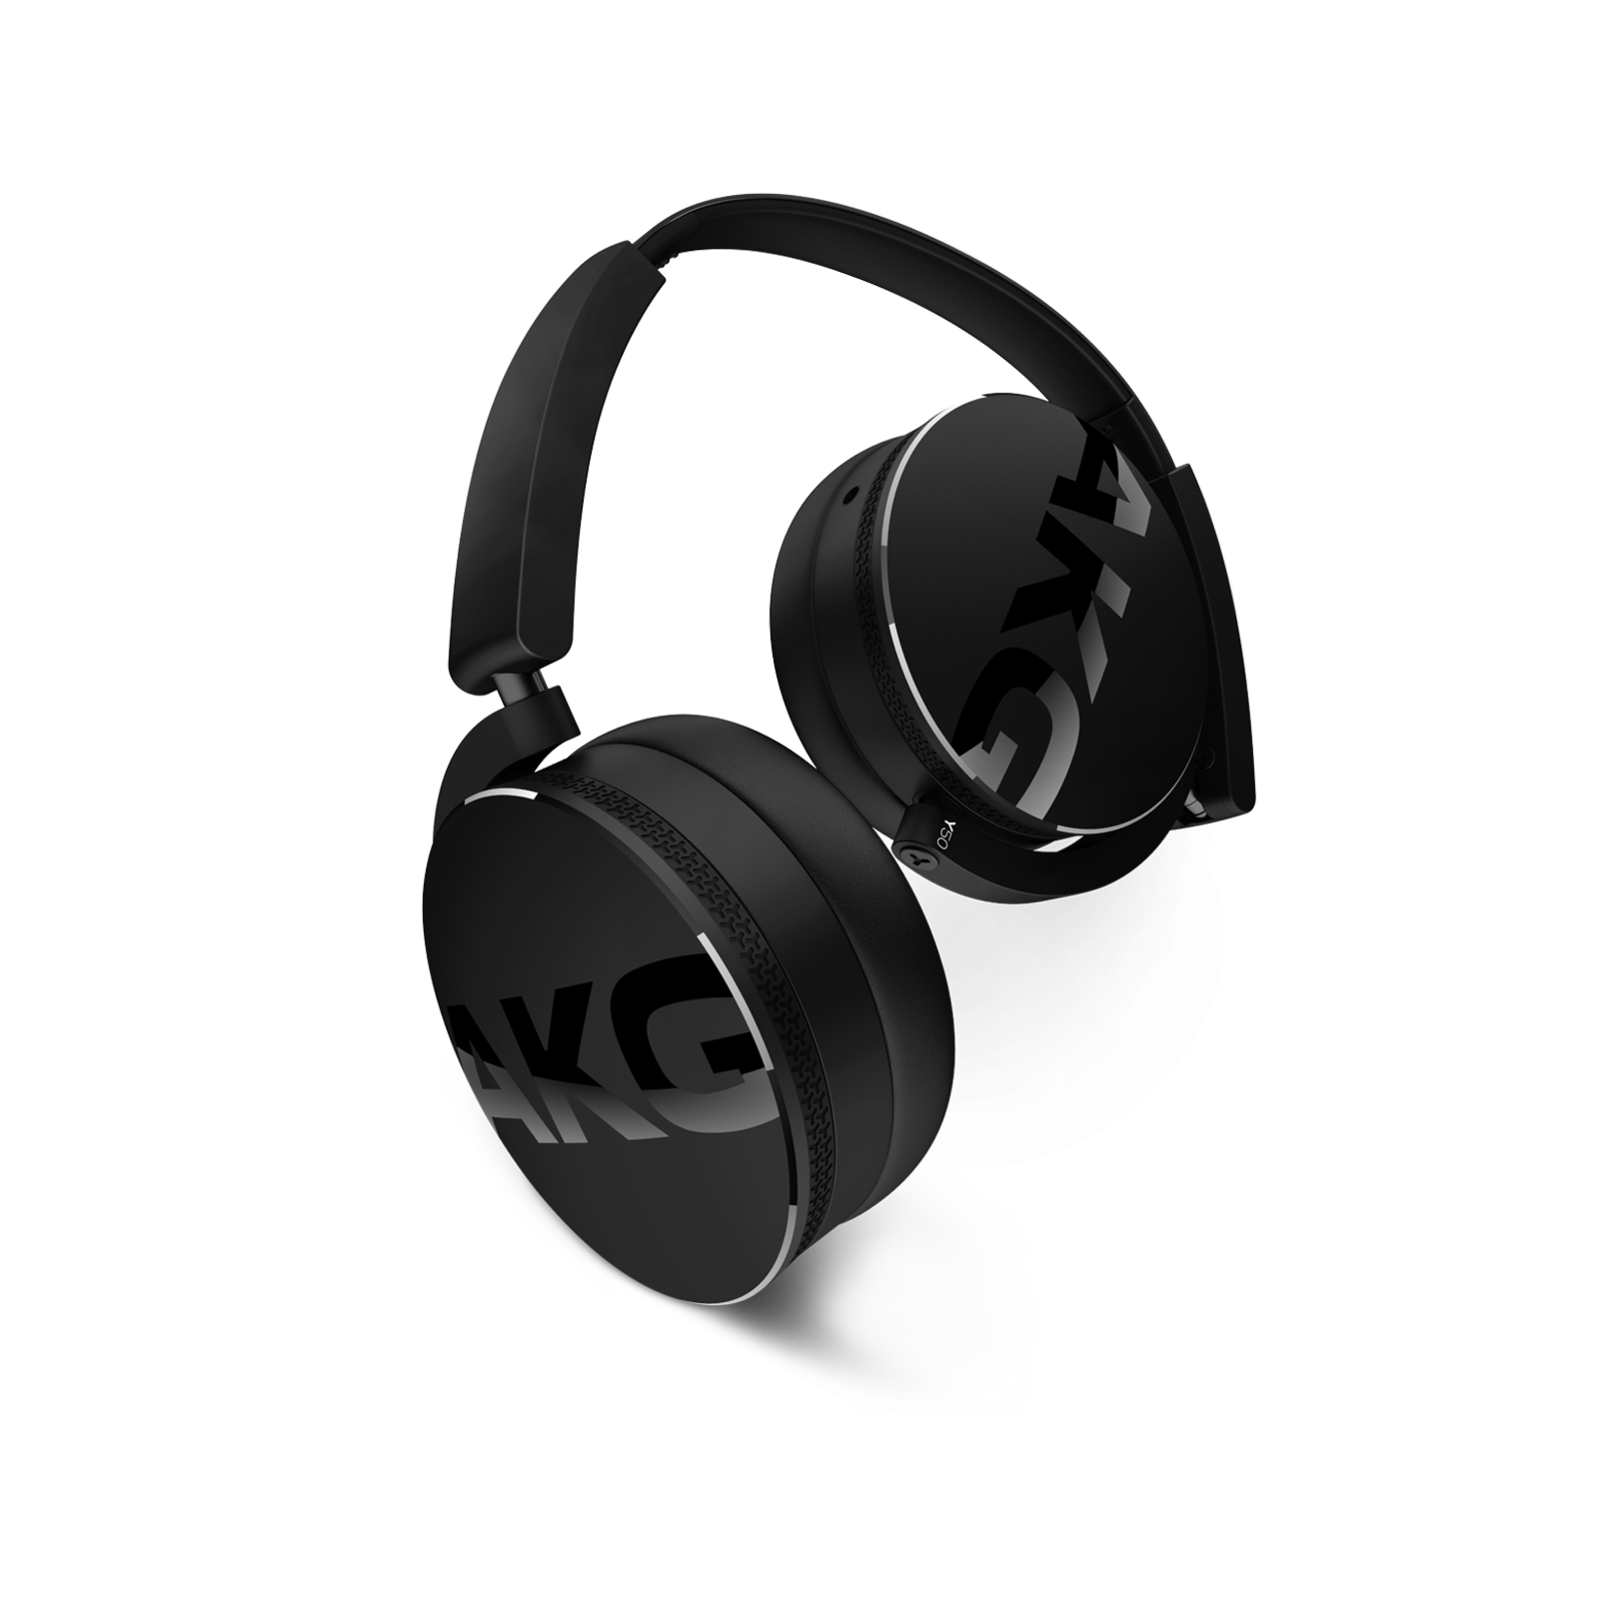 Y50 - Black - On-ear headphones with AKG-quality sound, smart styling, snug fit and detachable cable with in-line remote/mic - Hero